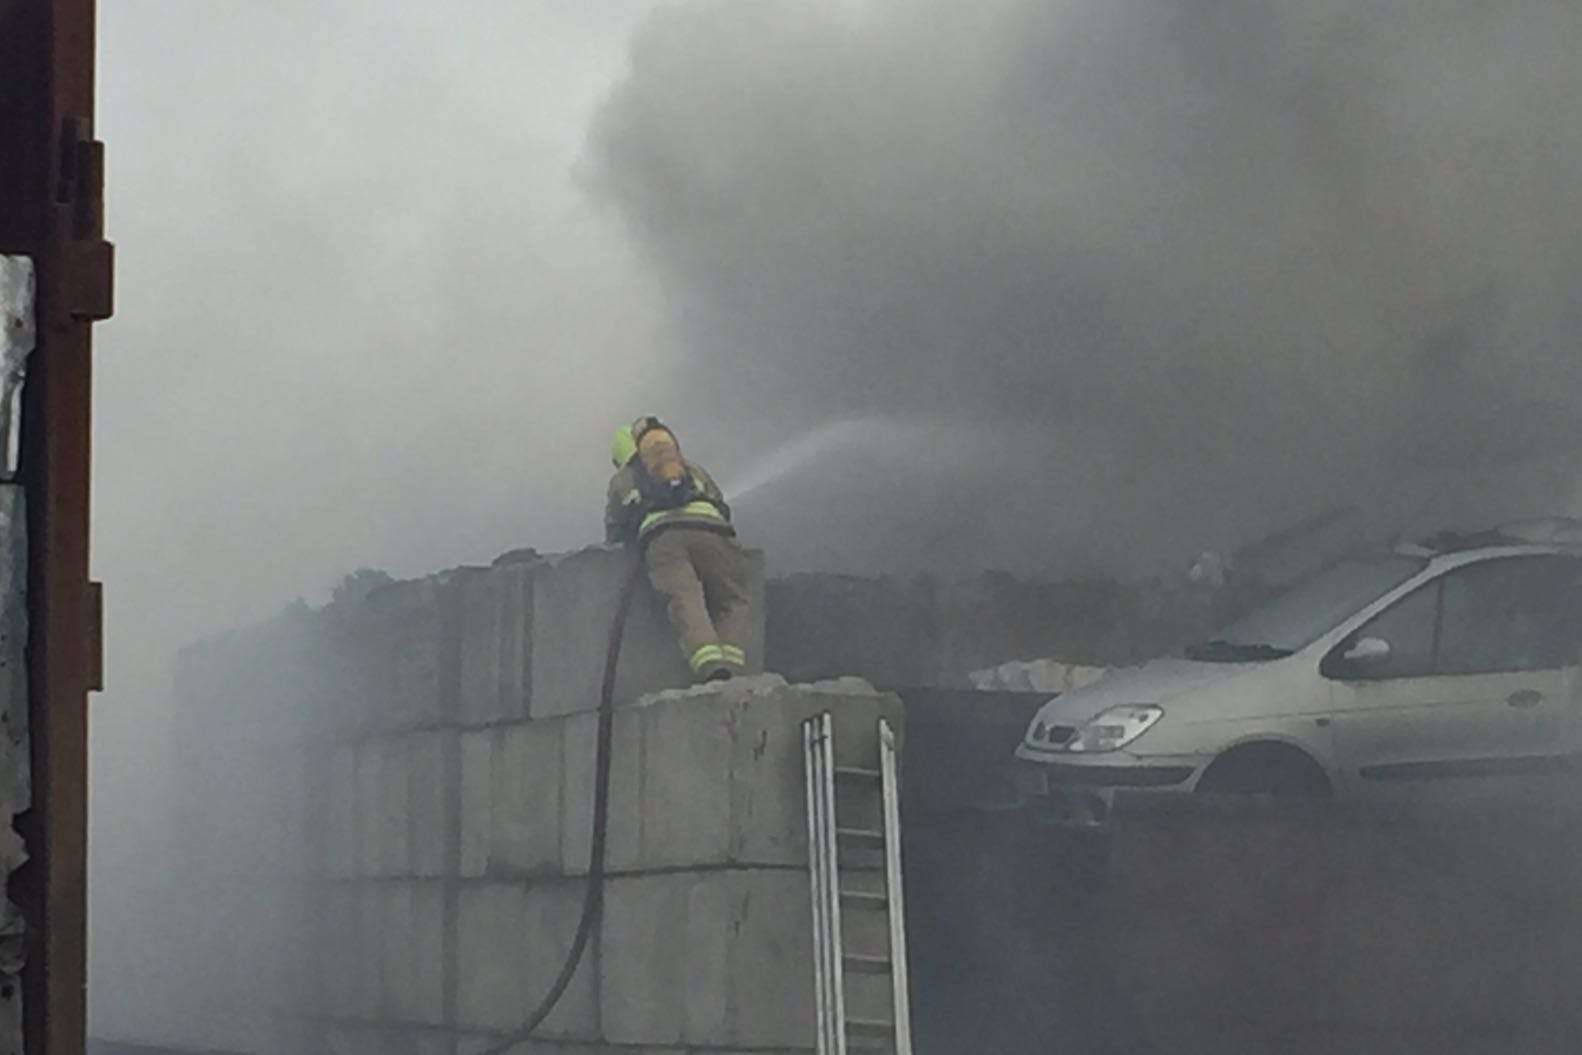 Firefighters are tackling the blaze